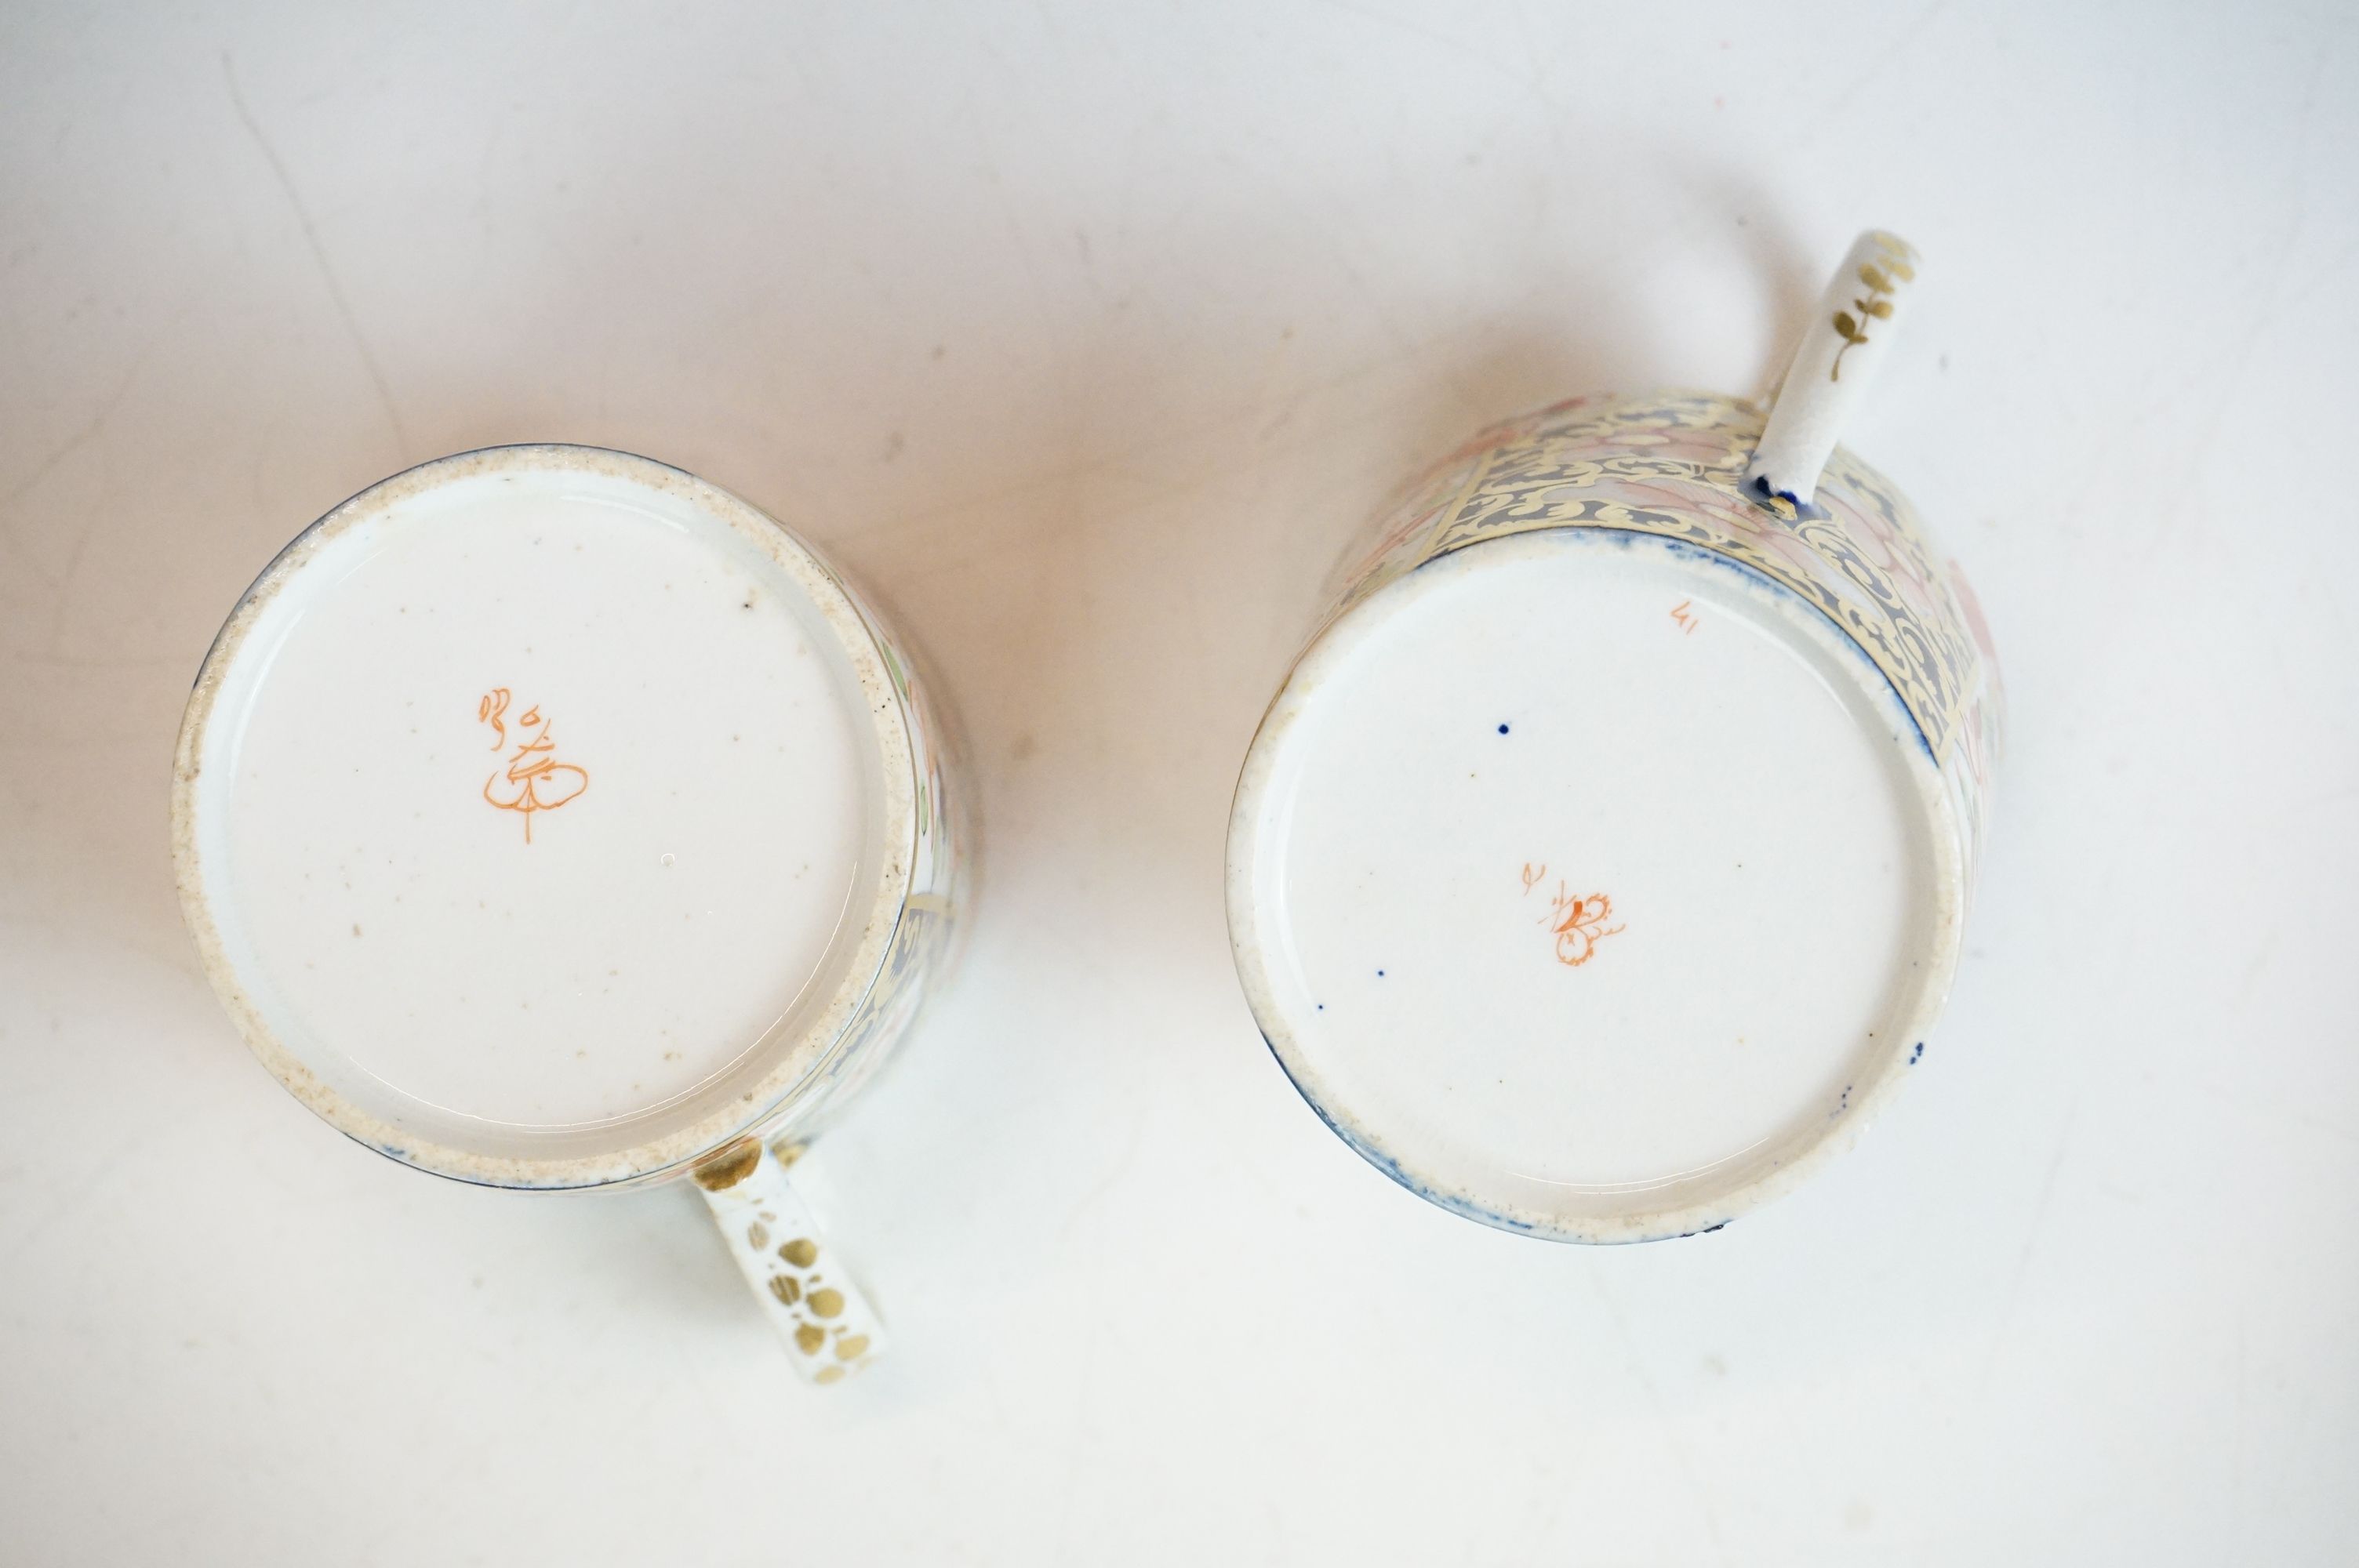 Early 19th century Crown Derby Imari pattern ceramics to include a small tureen & cover, teacups, - Image 21 of 24